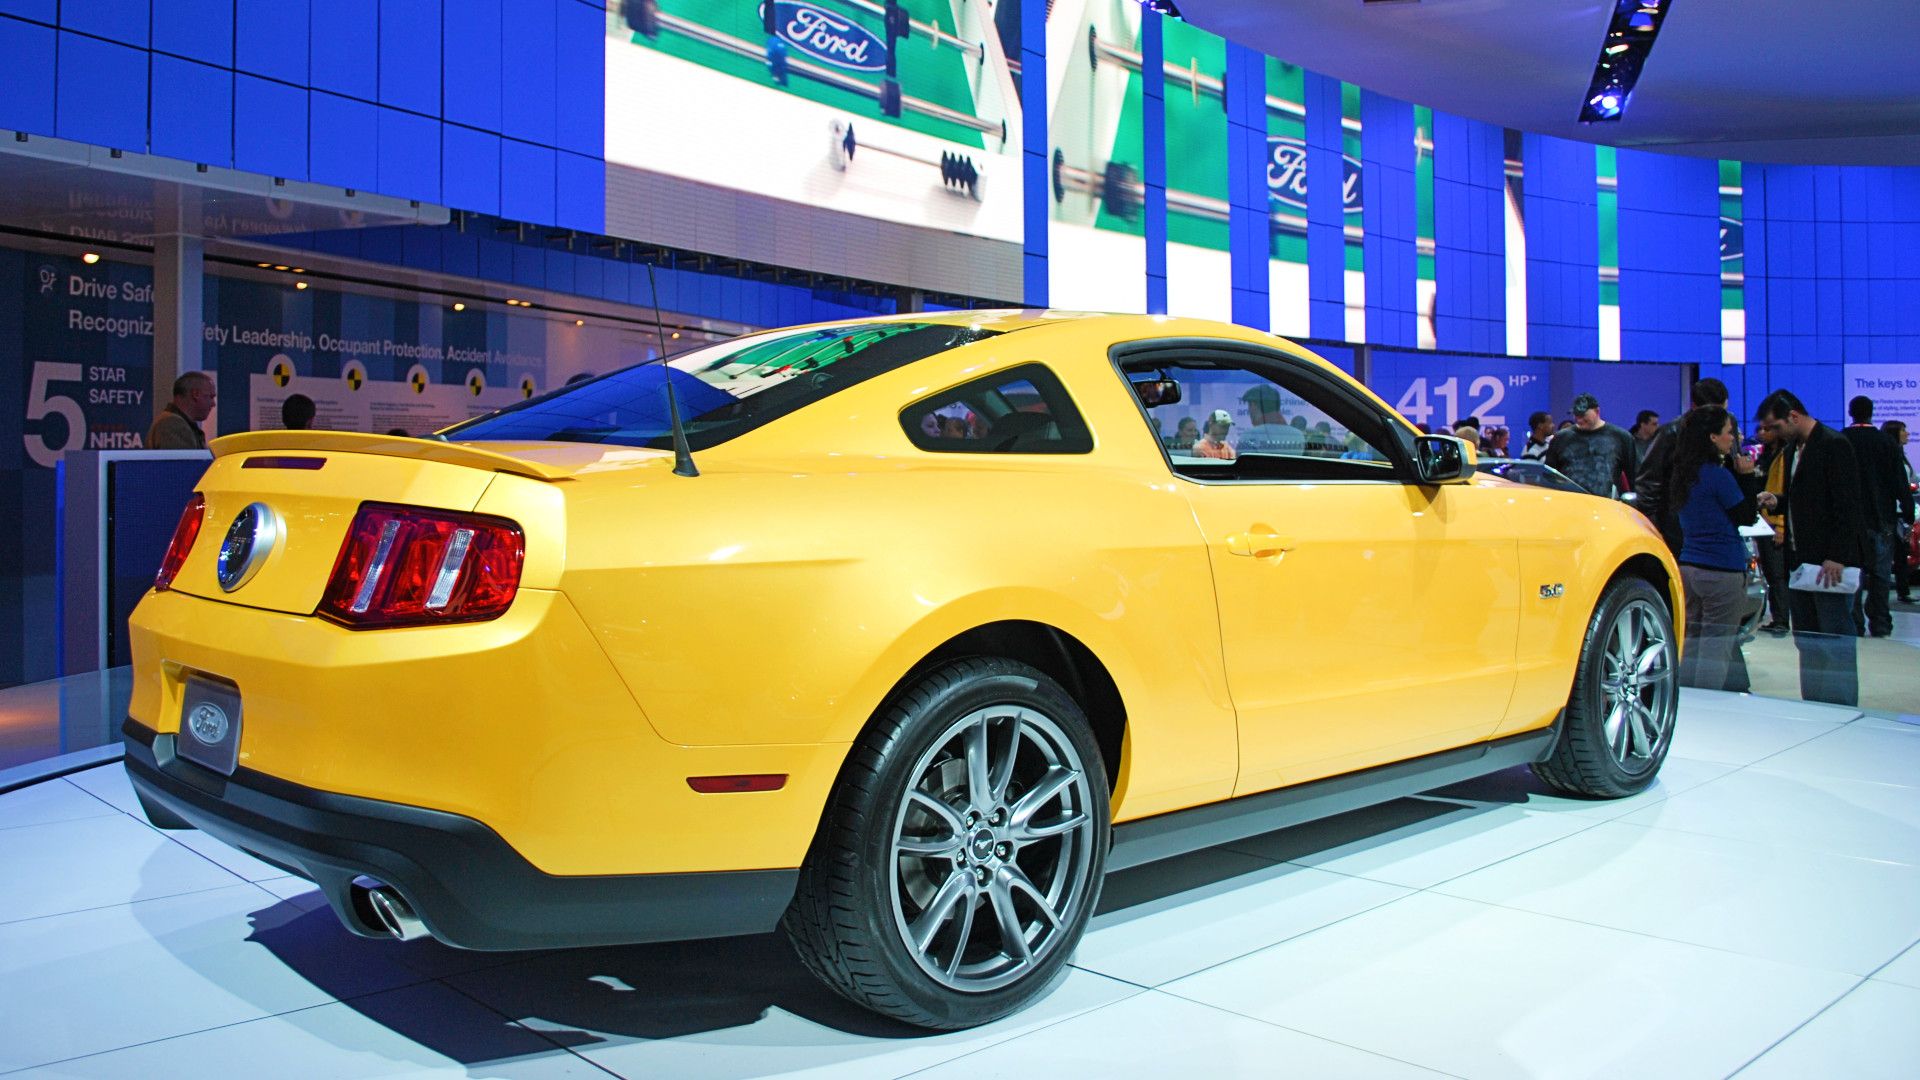 2011 Ford Mustang GT on display